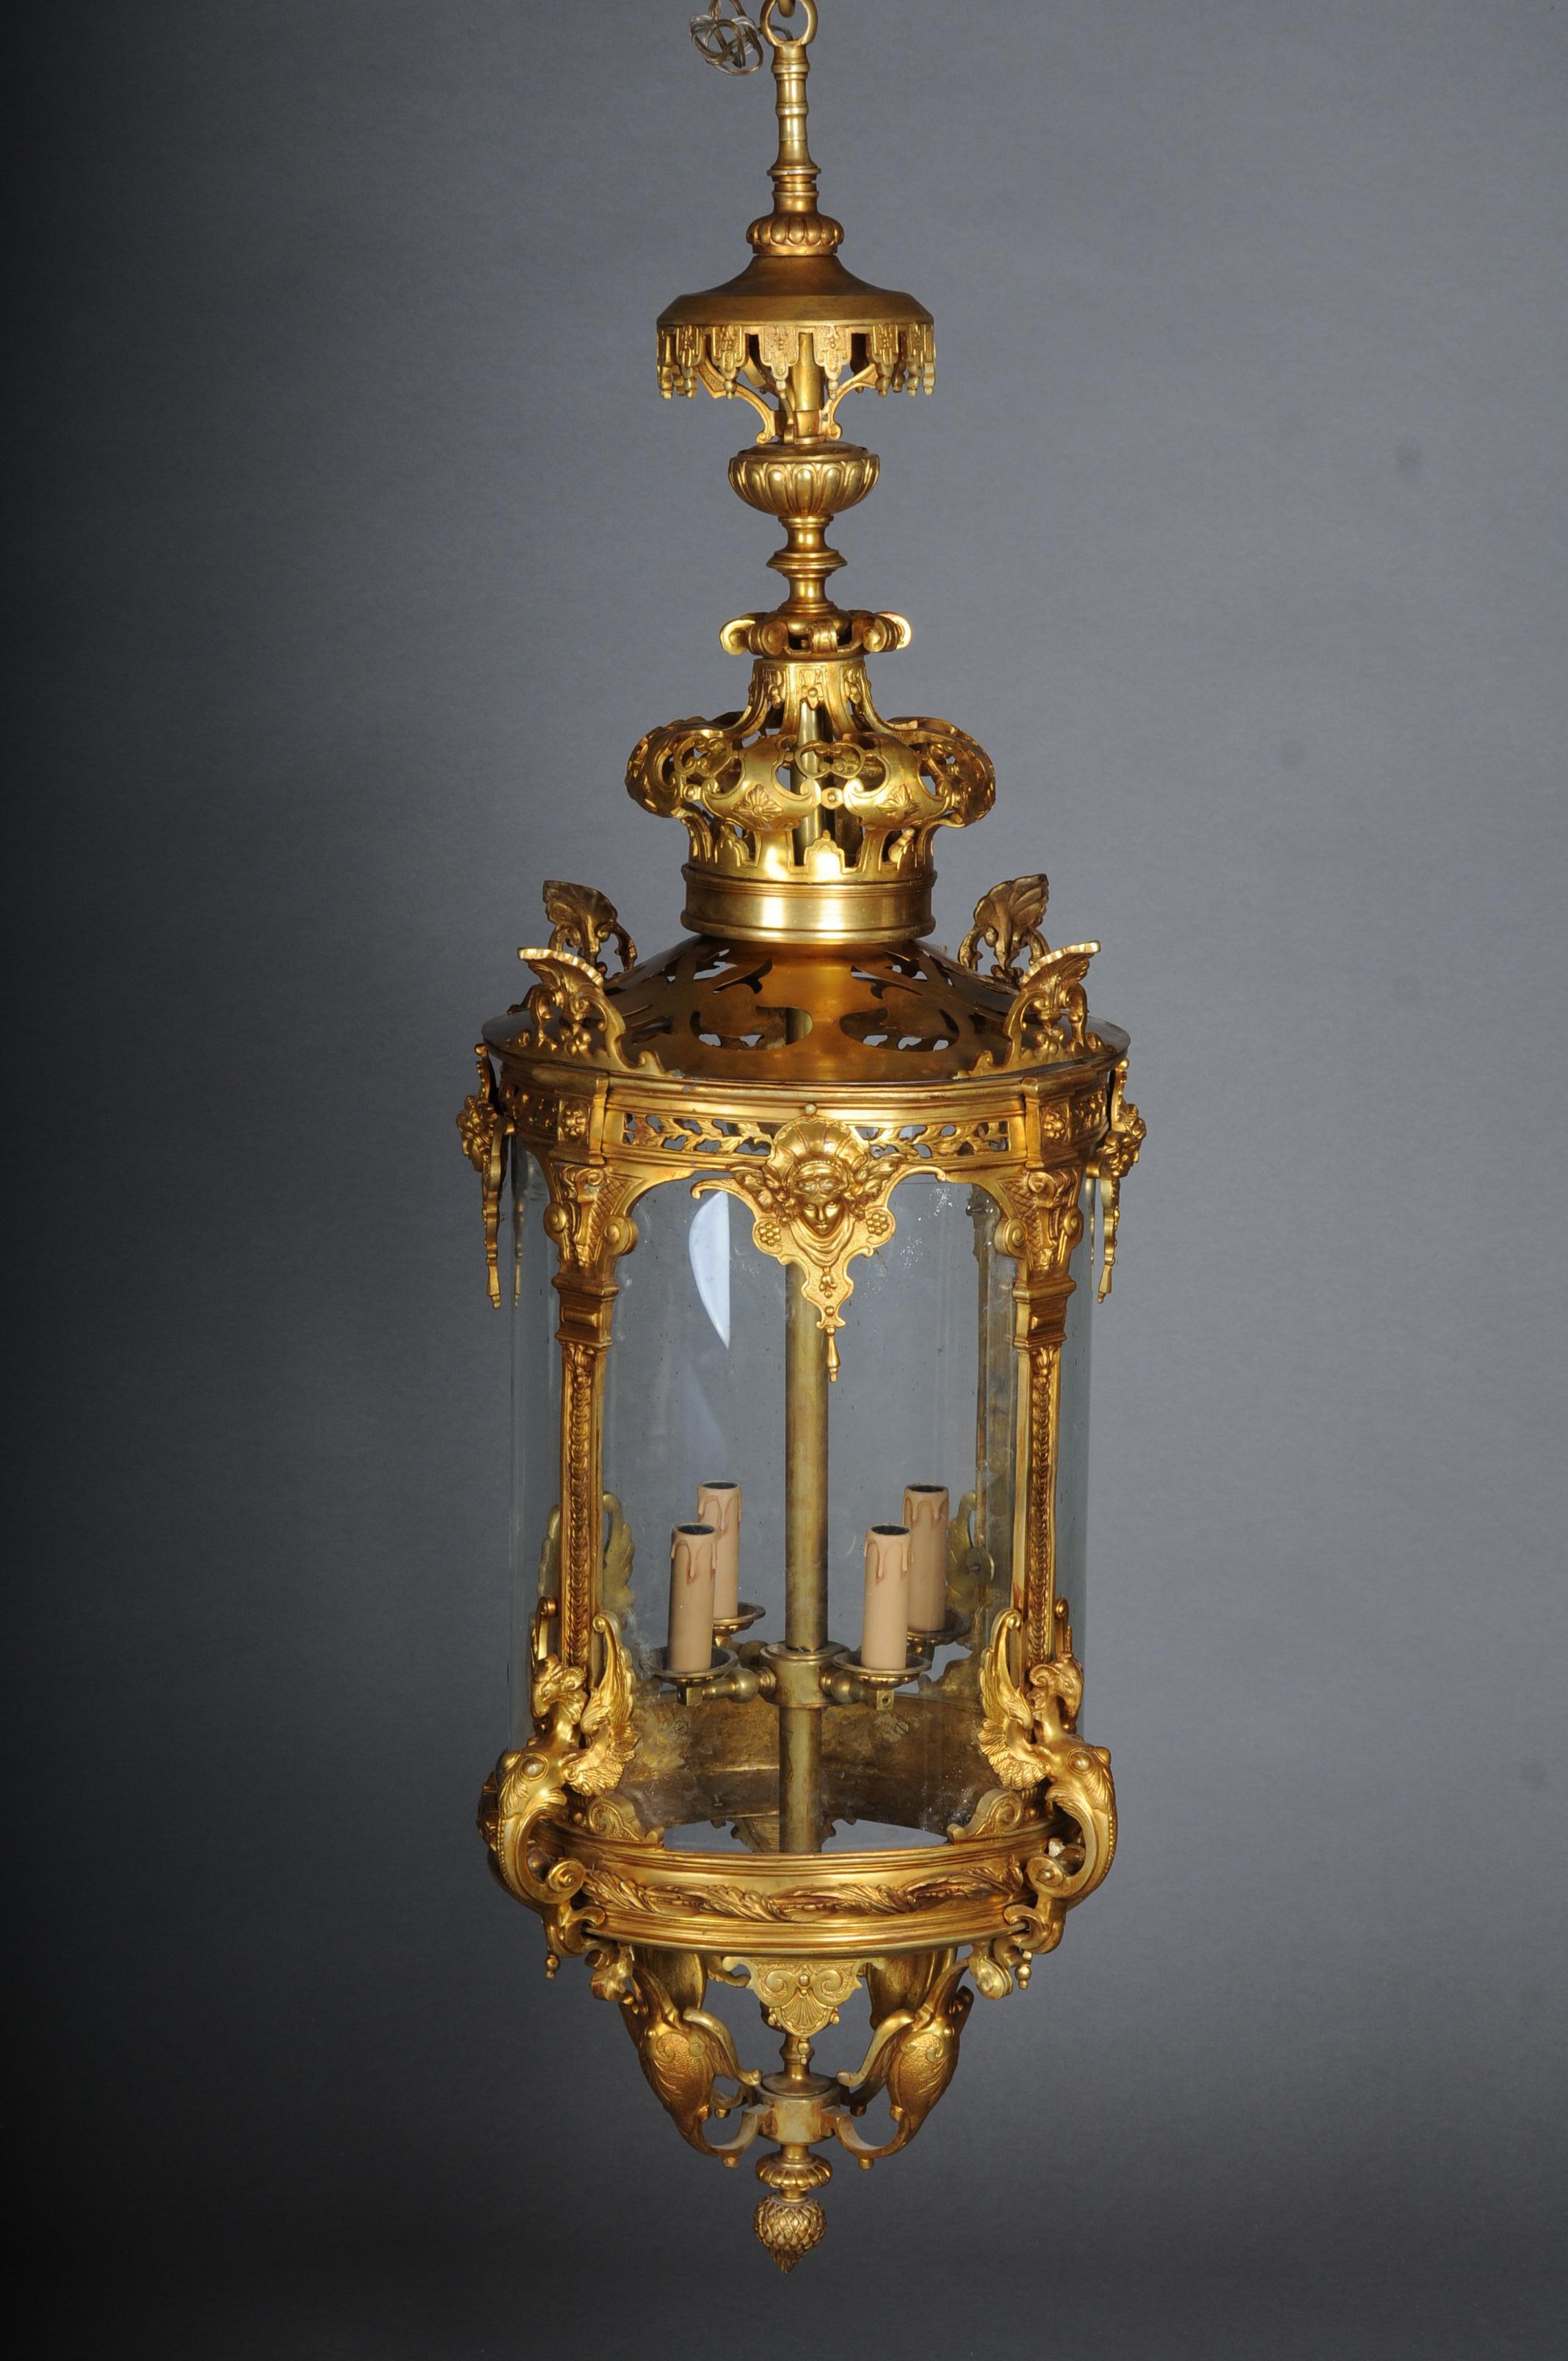 French Fire Bronze brass lantern/chandelier Louis XVI Shape

This exquisite lantern stands out with its distinctive shape.
High-quality processed with decorative elements from the Louis XVI.
The frame of the lantern is adorned and sculpted with rich